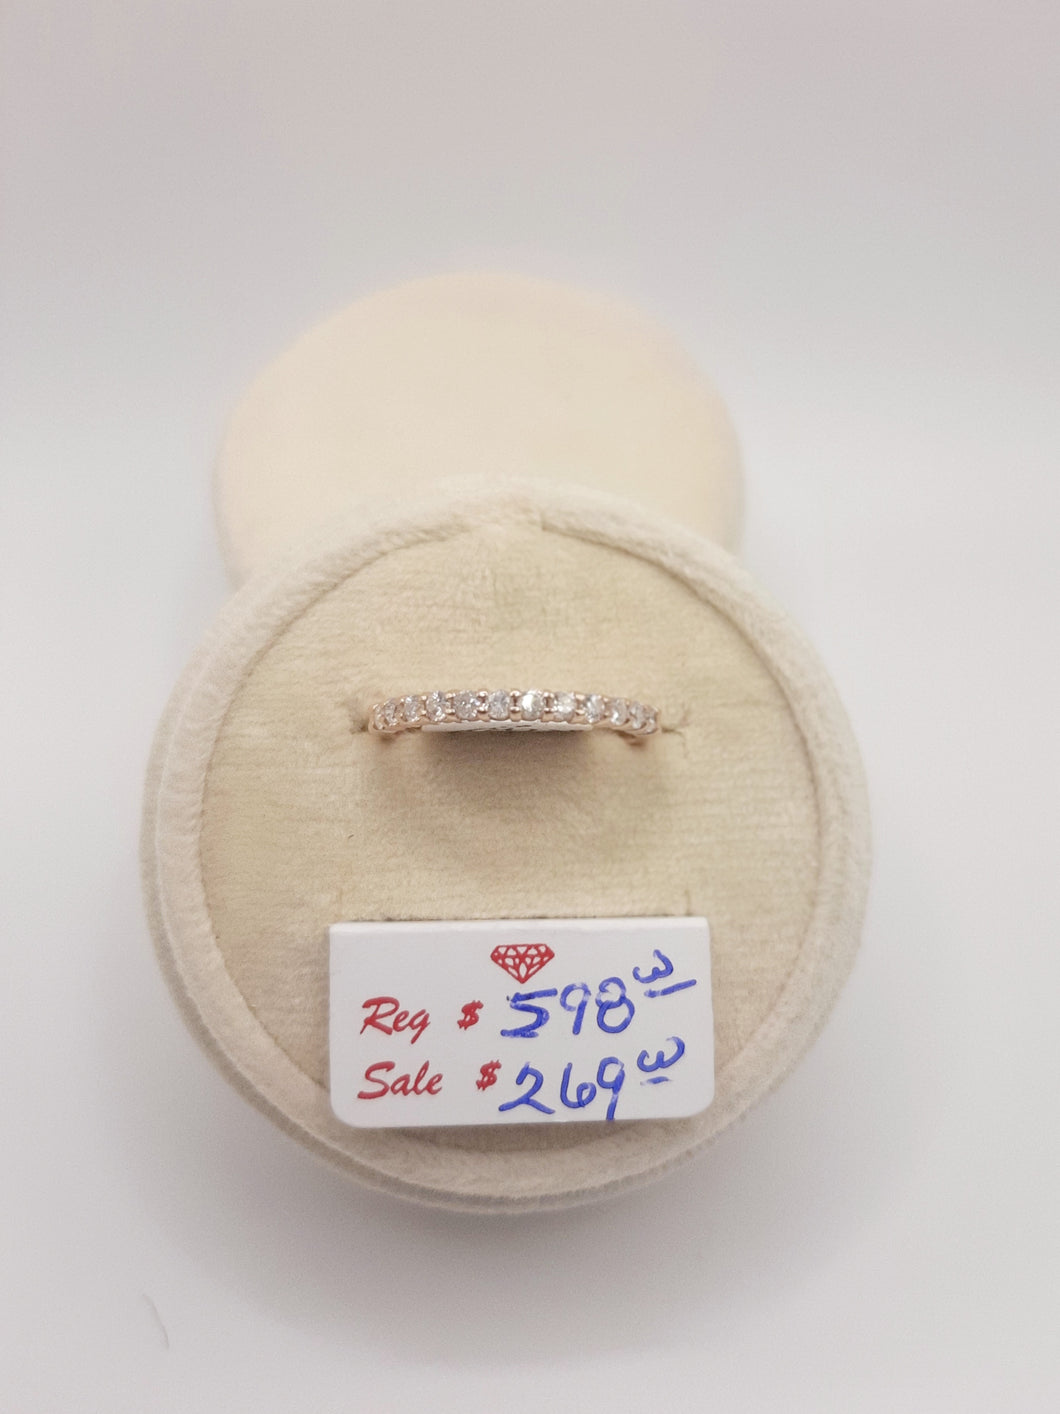 14Kt White or Rose Gold Prong Set Diamond Bands Featuring .33 Carats of Natural Diamonds